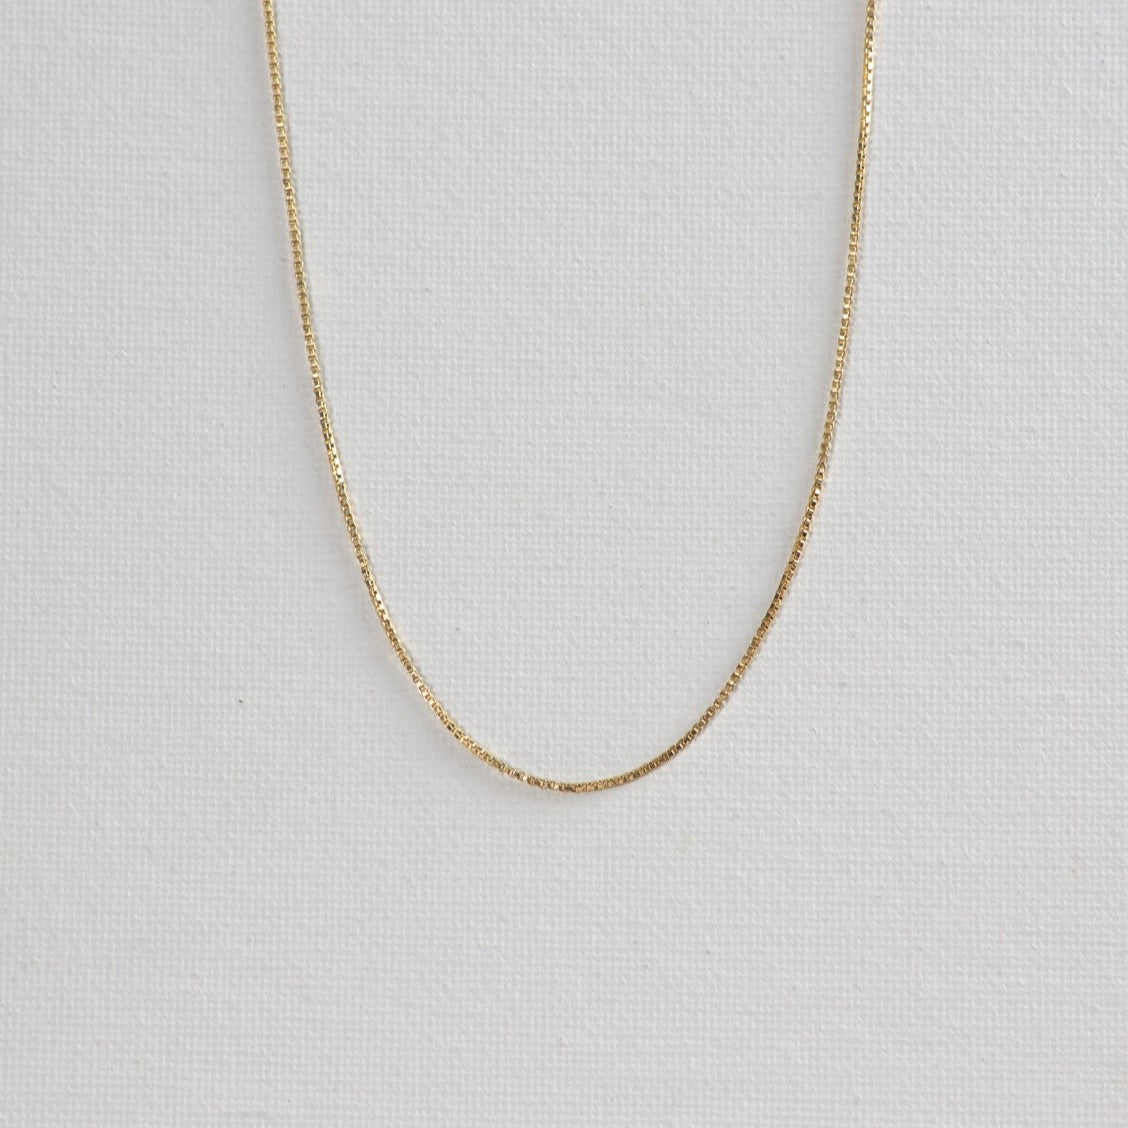 Baby box chain necklace photographed on a white background.